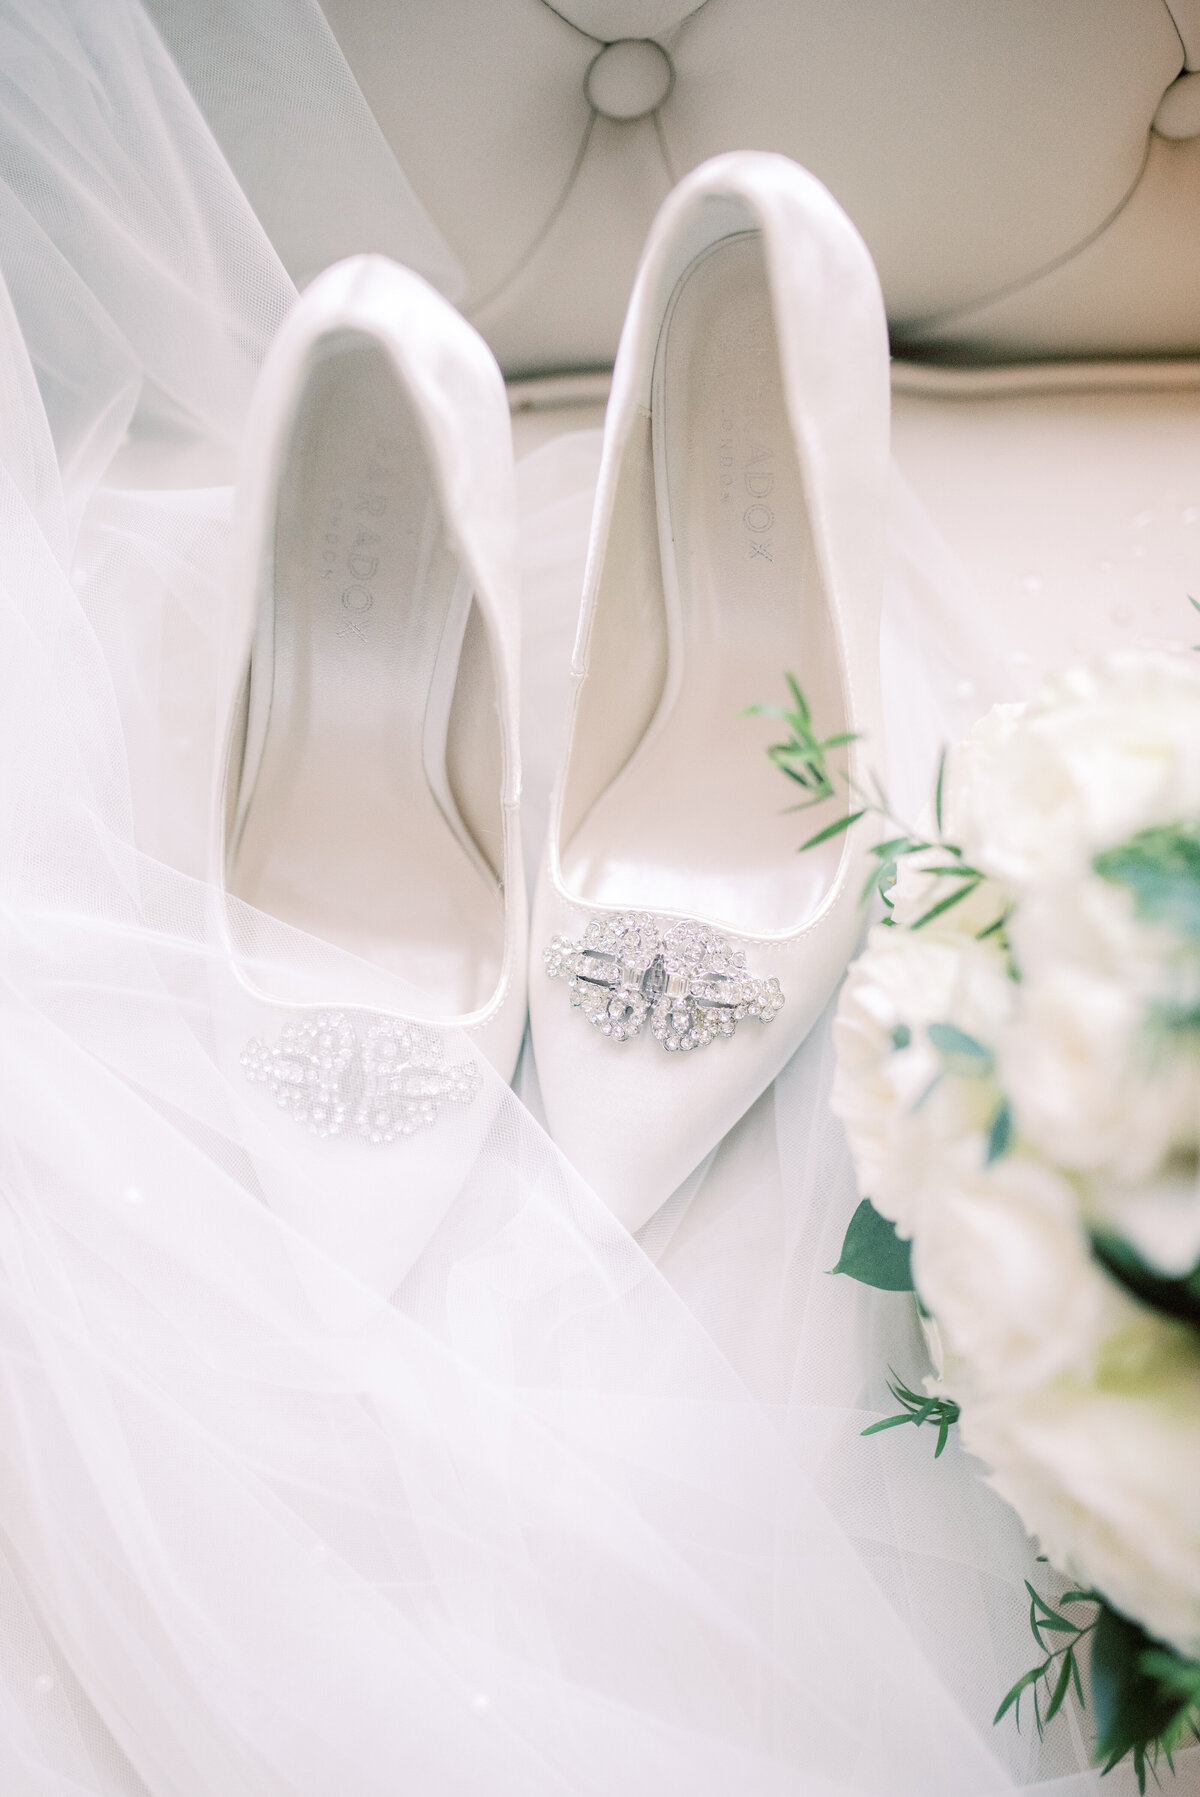 Bridal shoes and bouqet placed with the veil . the image is edited in a light and airy style